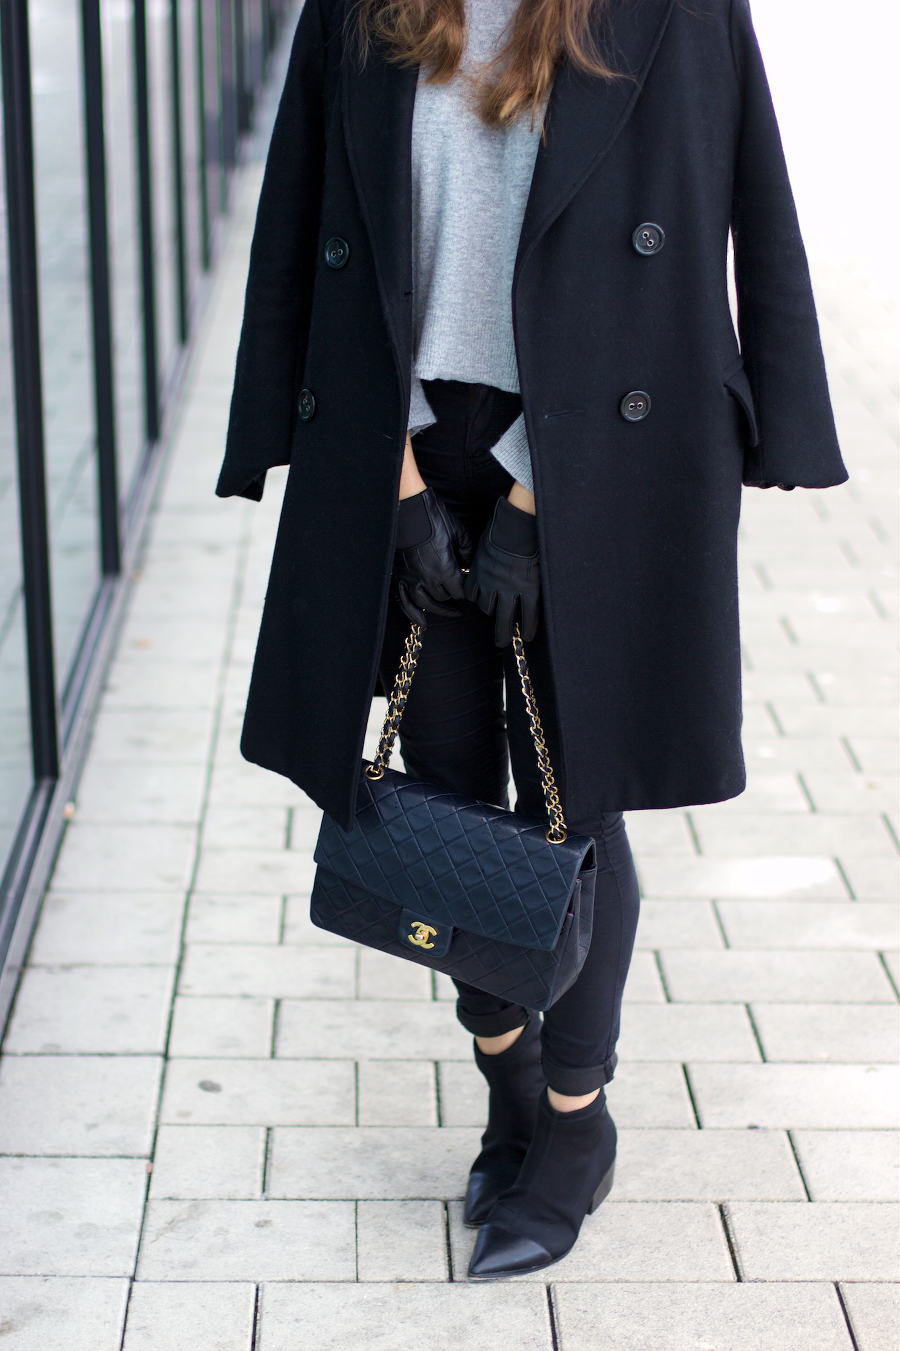 Black Coat XXL Scarf Outfit Chanel